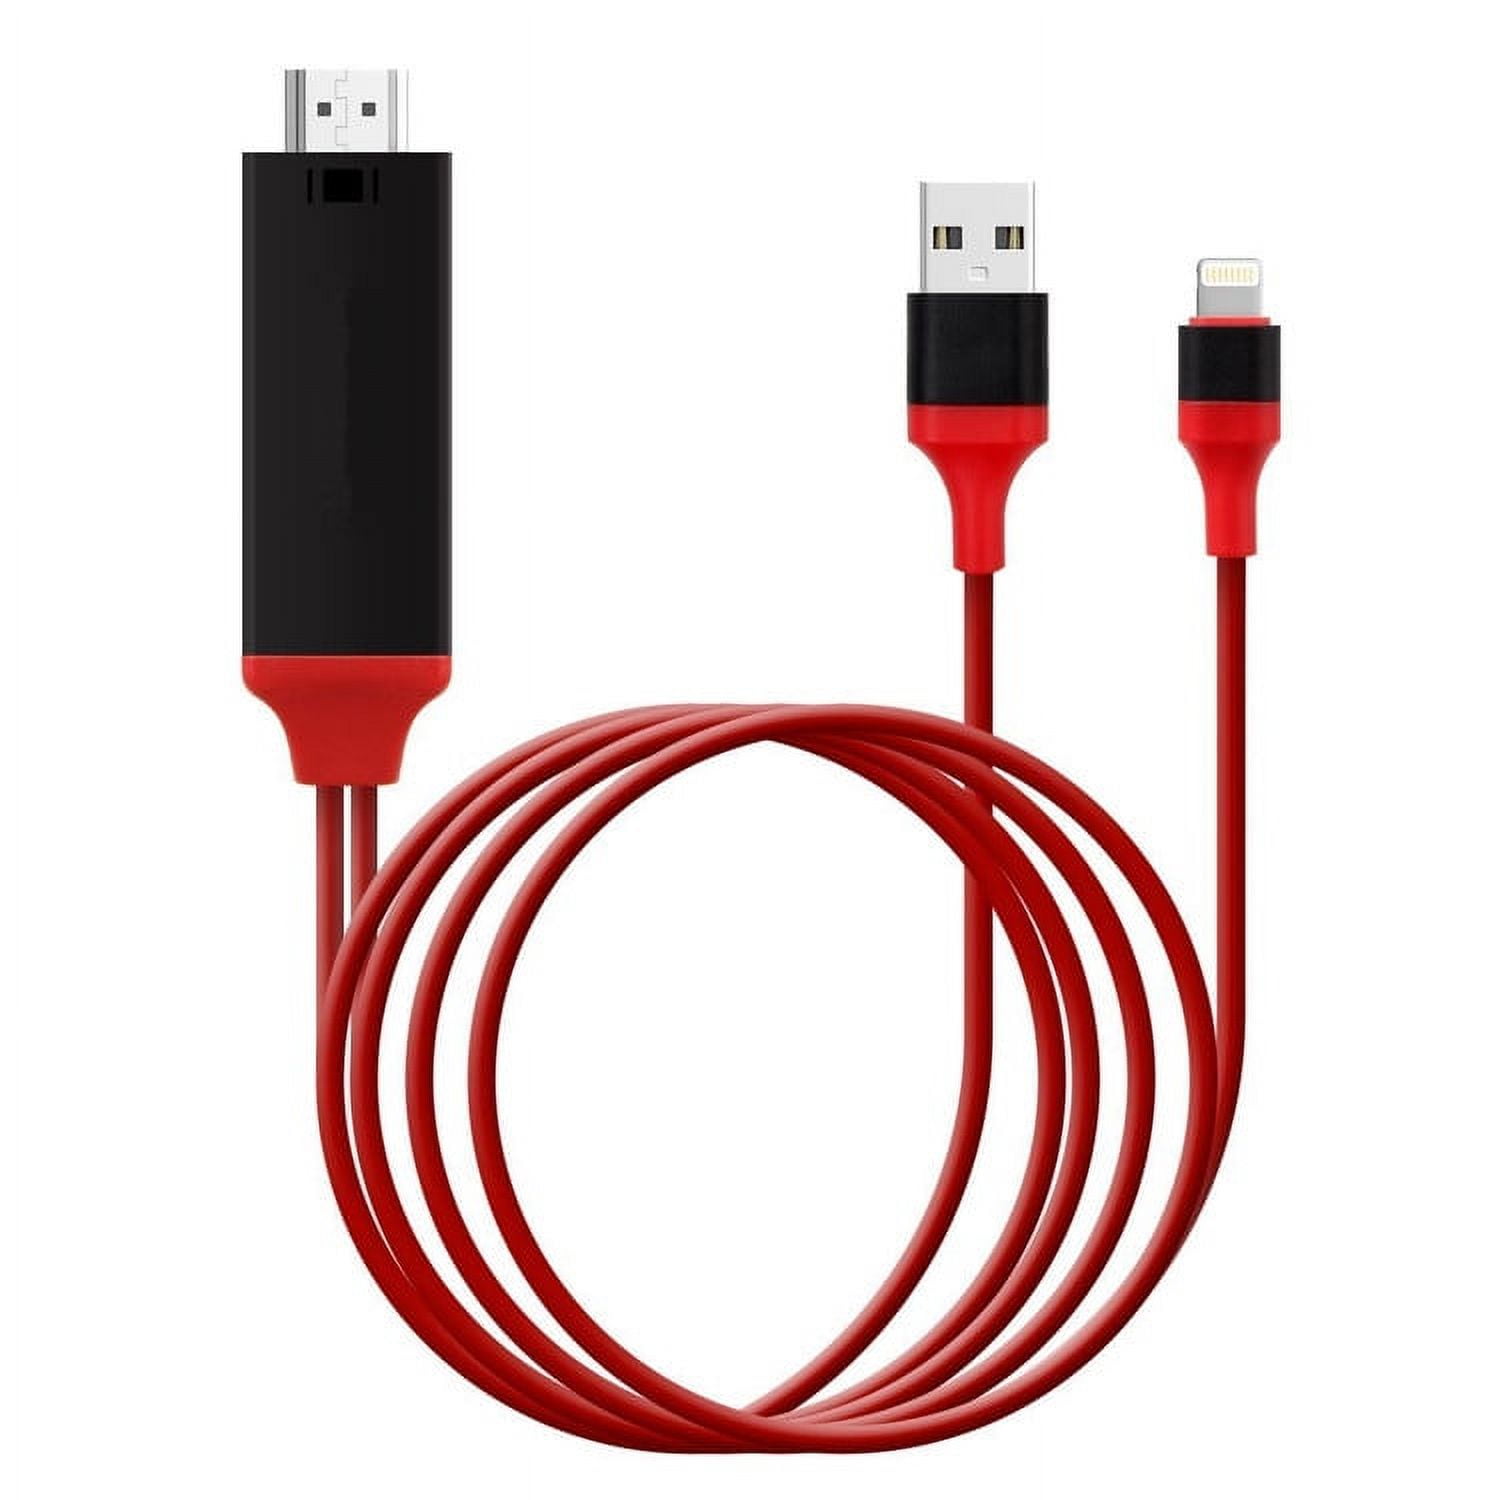 Lighnting Cable to HDMI, HD TV Cable for Iphone,Ipad Mini Video